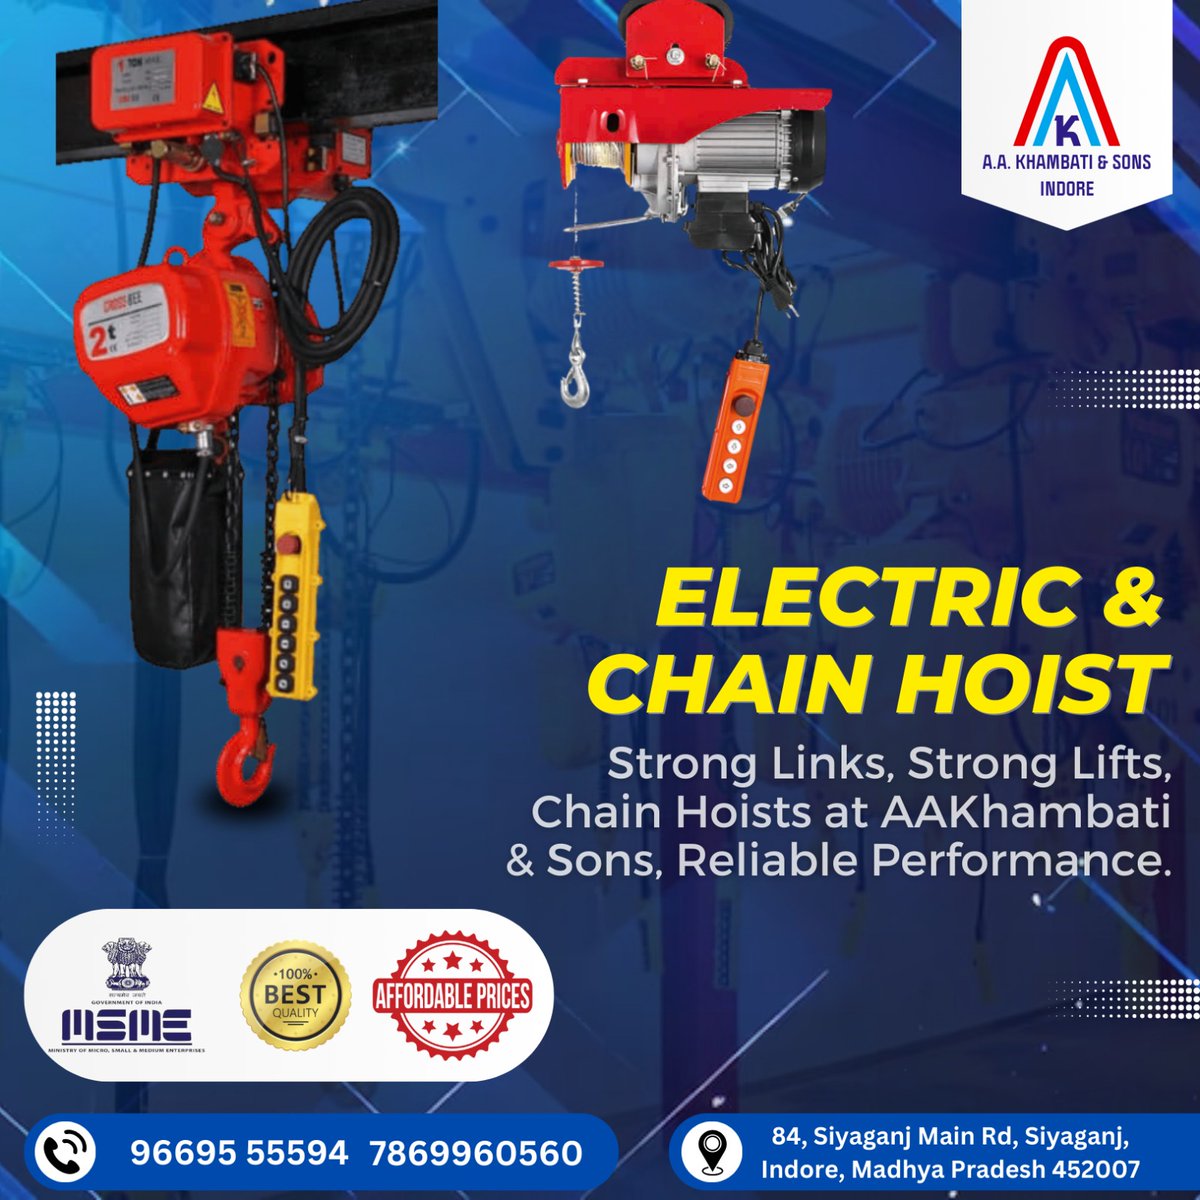 Experience the Power of Precision with AA Khambati's Electric and Chain Hoists! Elevate your lifting needs with reliability and efficiency.
.
.
.
#ElectricHoist #ChainHoist #LiftingSolutions #IndustrialEquipment #Reliability #Efficiency #QualityAssurance #AAKhambati